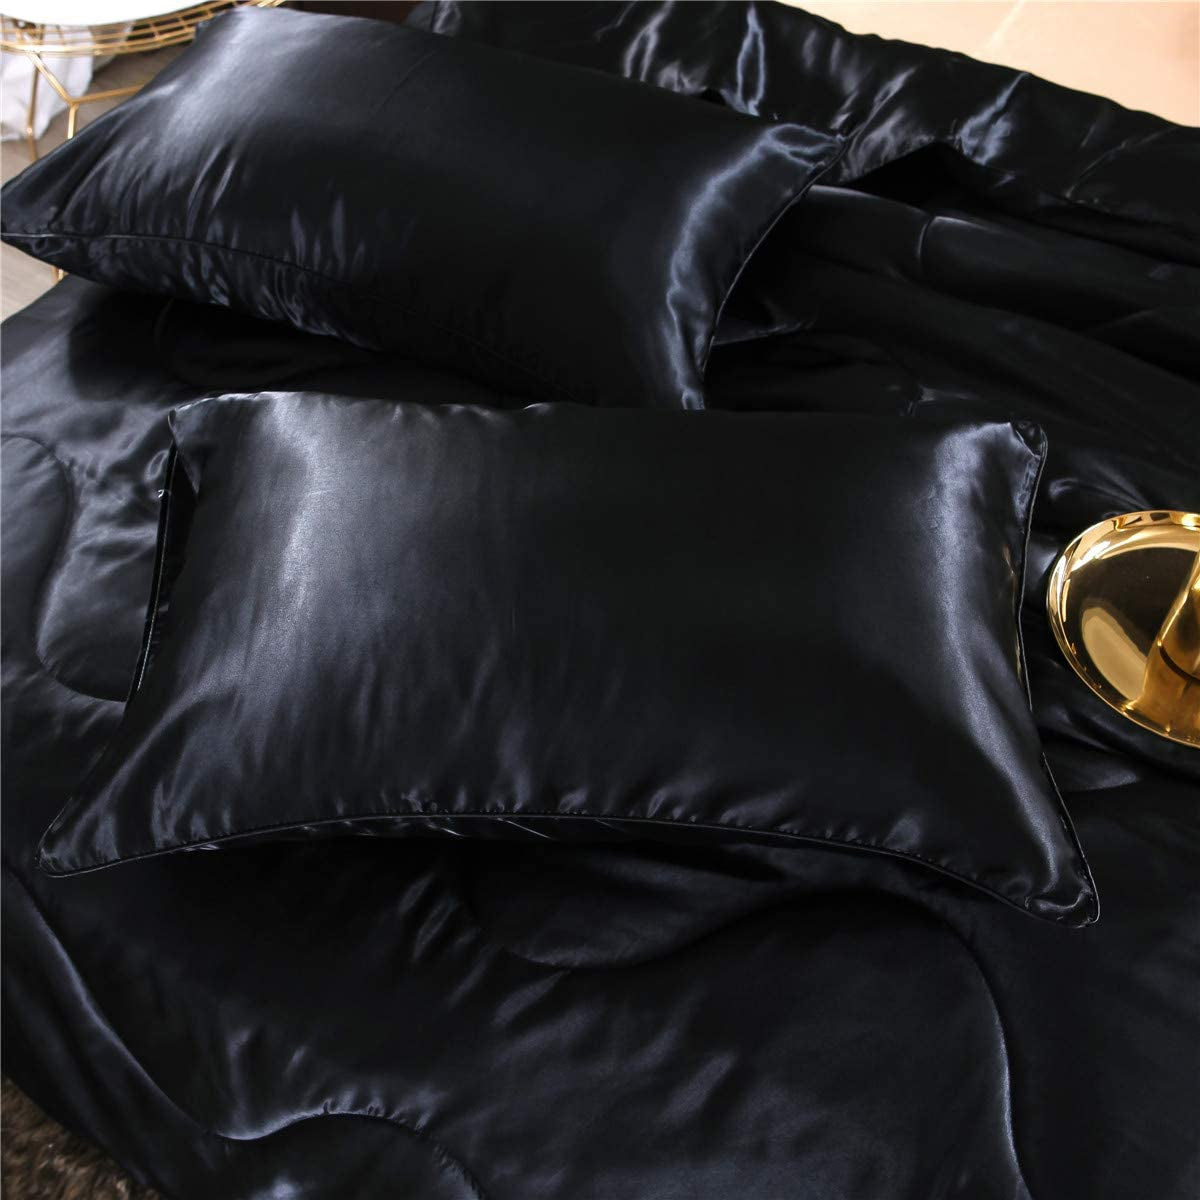 NTBED Silky Satin Comforter Set Queen Black, Soft Lightweight Microfiber Luxury Sexy Quilted Bedding Sets with 2 Matching Pillow Covers for Summer Spring Autumn